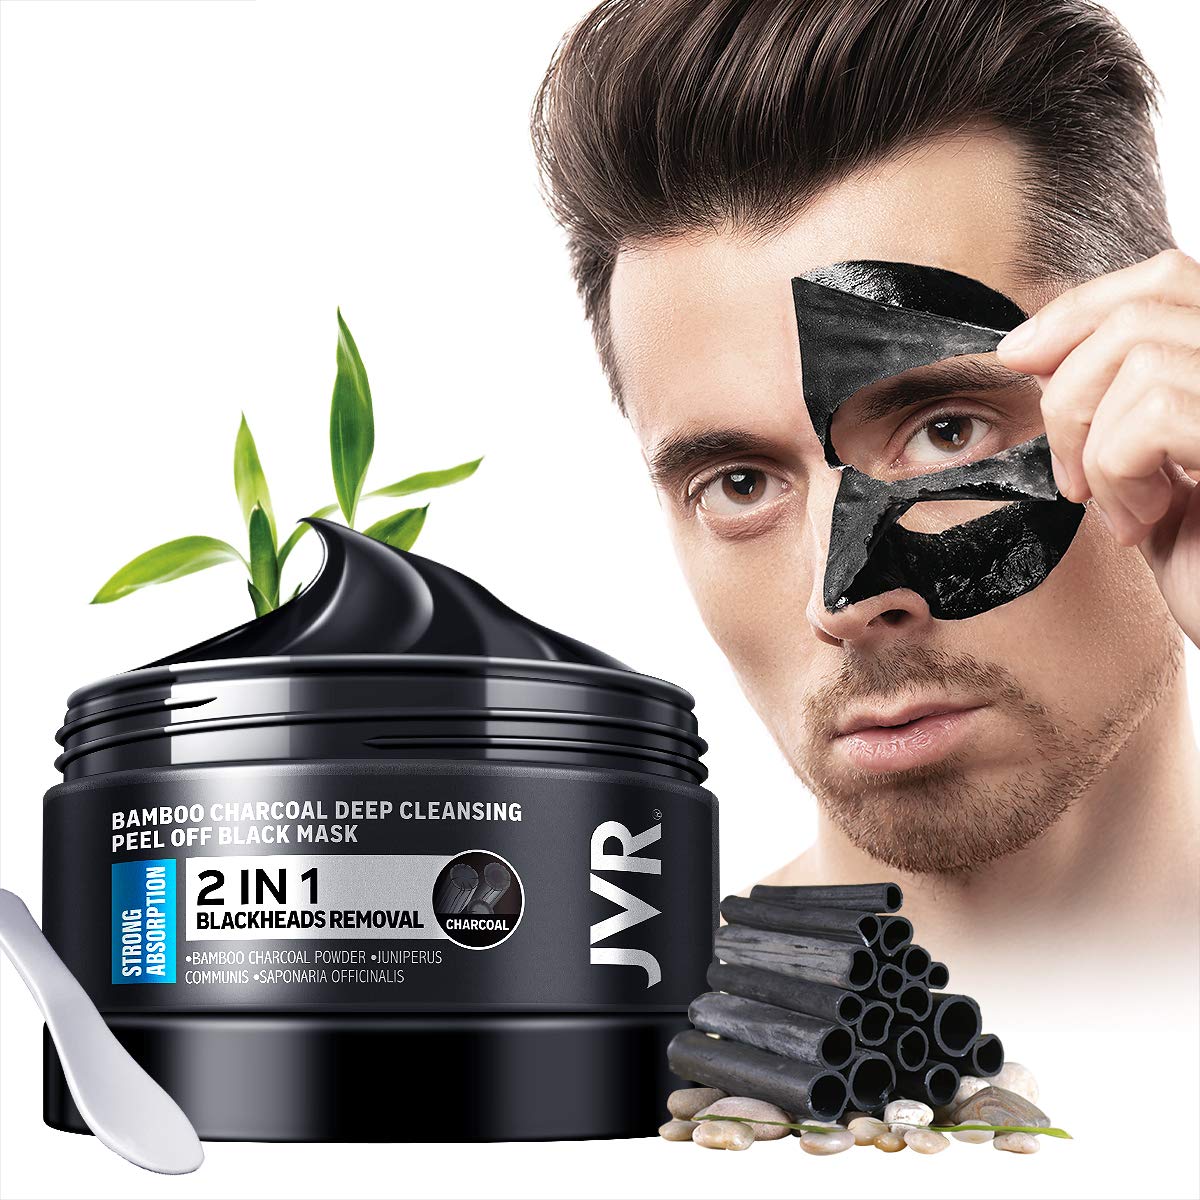 JVR Blackhead Remover Mask - Bamboo Charcoal Cleansing Mask